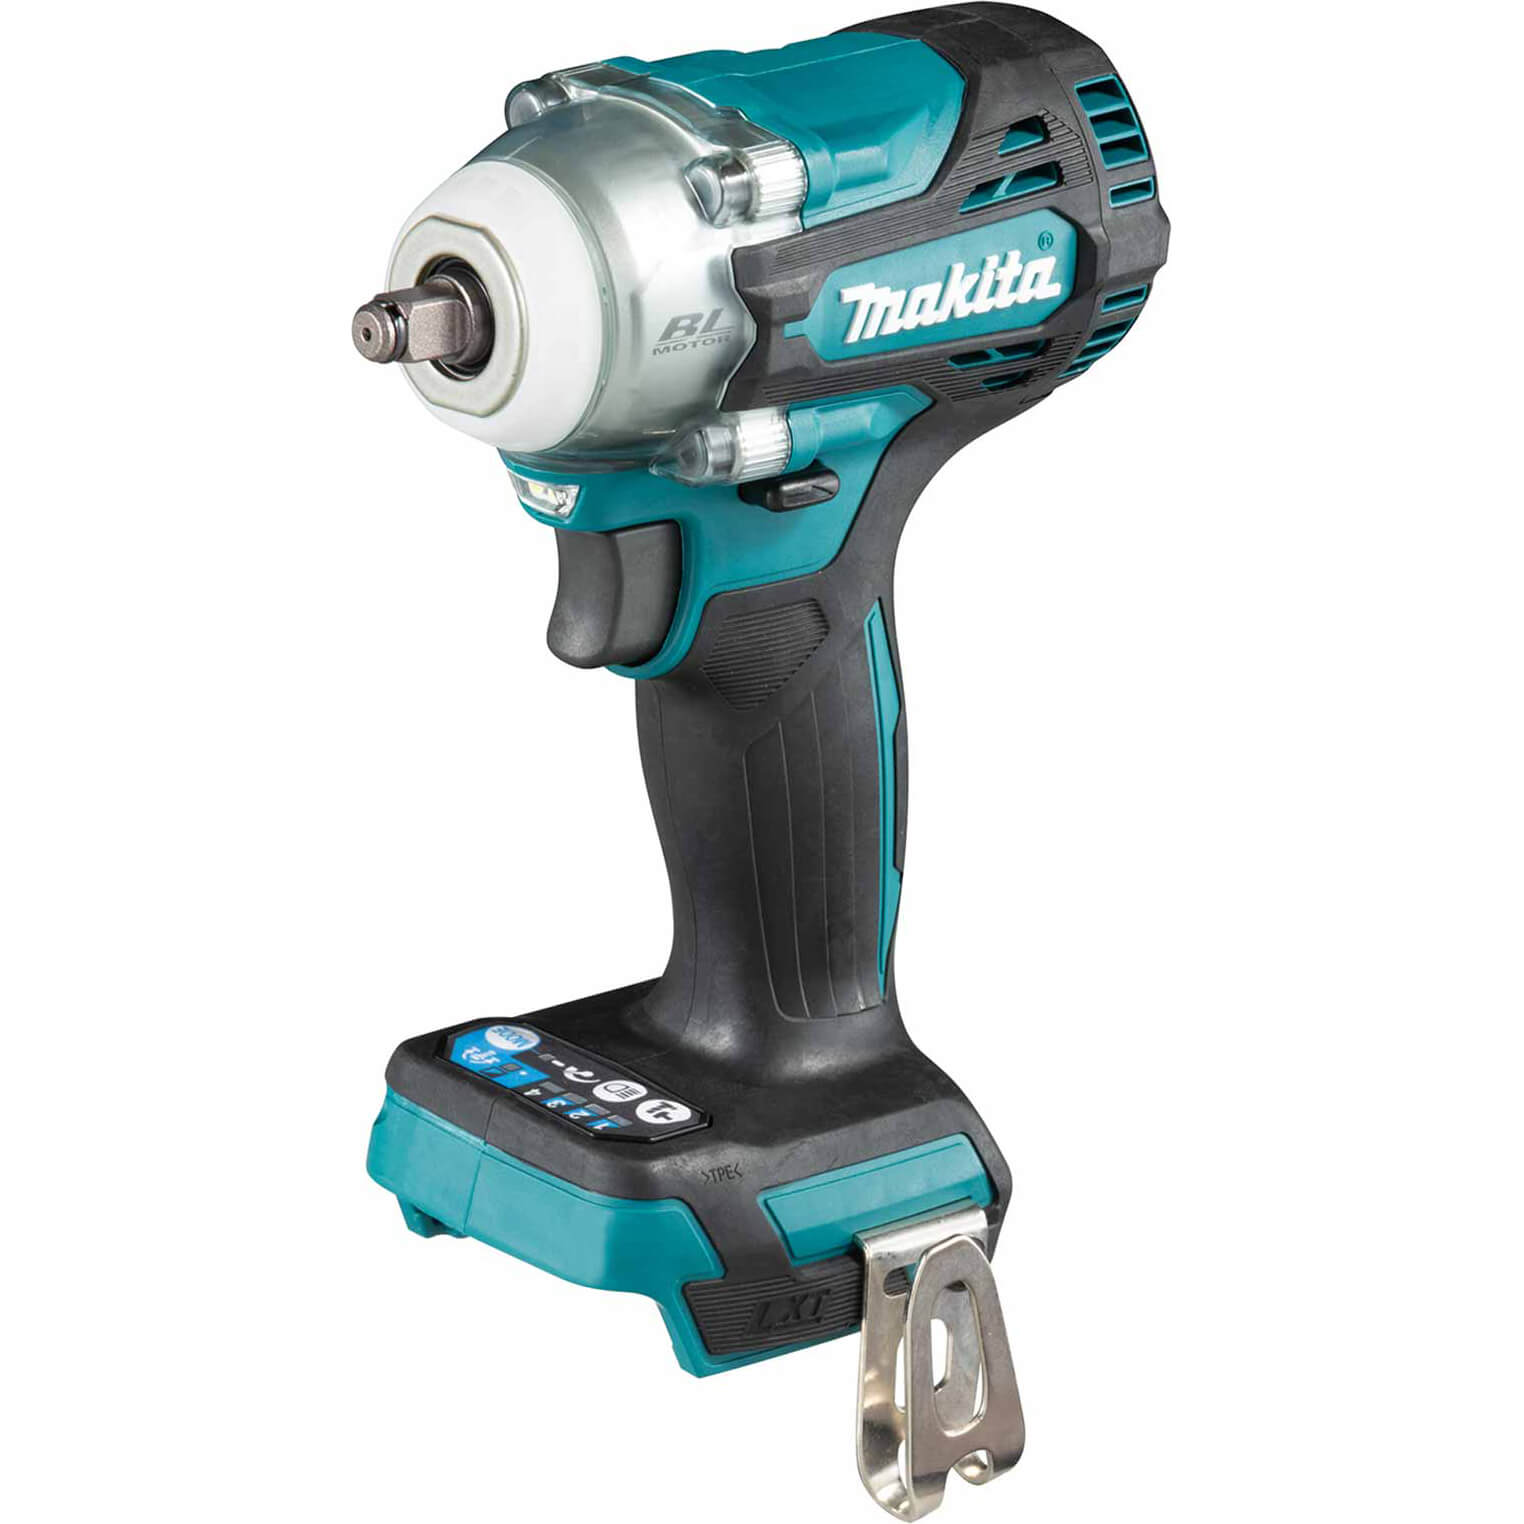 Makita DTW302 18v LXT Cordless Brushless 3/8" Drive Impact Wrench No Batteries No Charger No Case